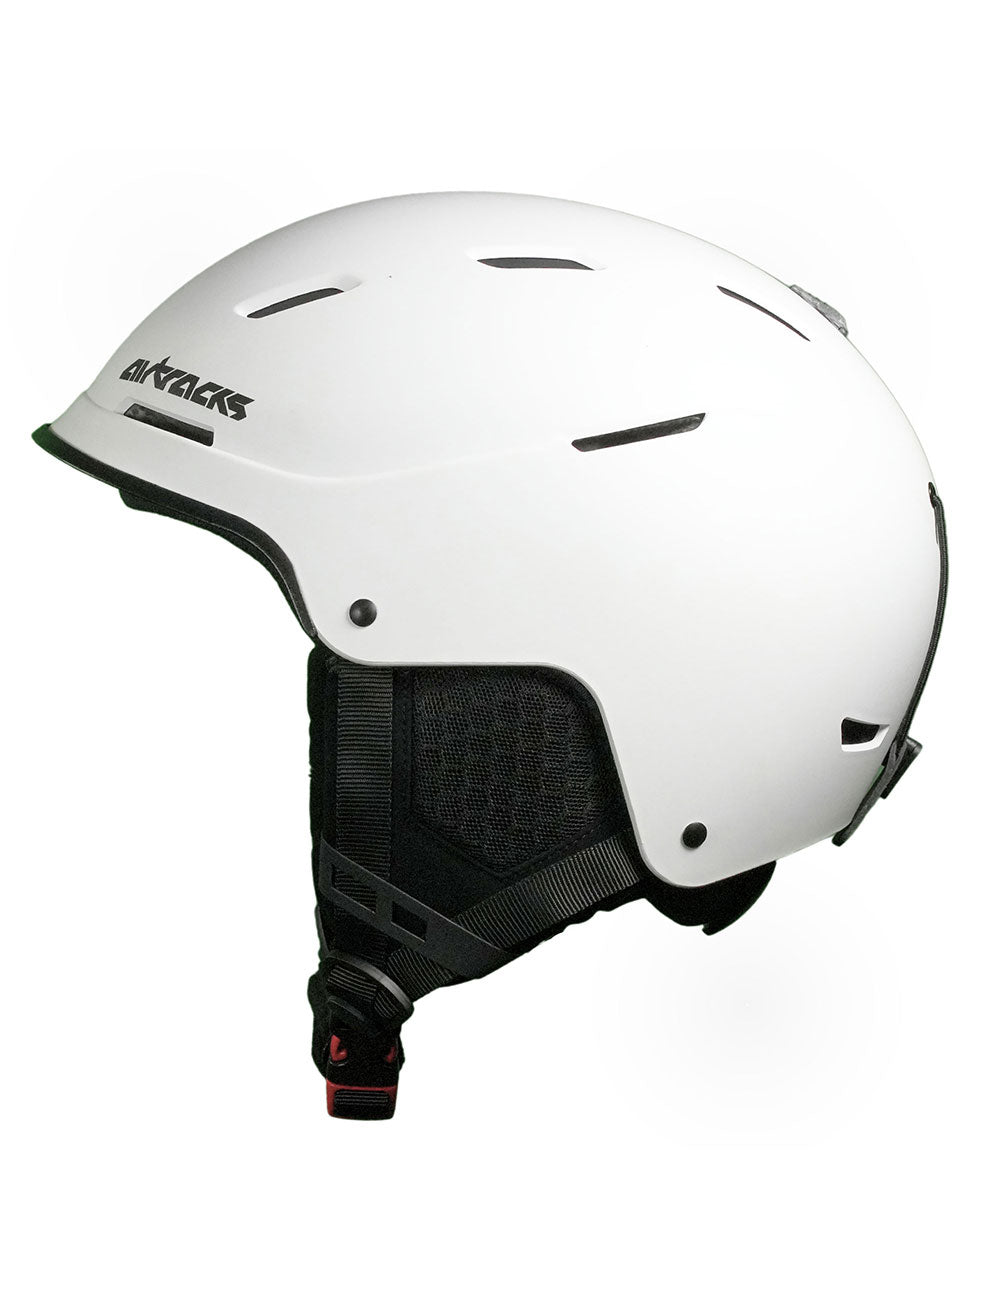 Strong_SB_Helm_sps2102_1300_1